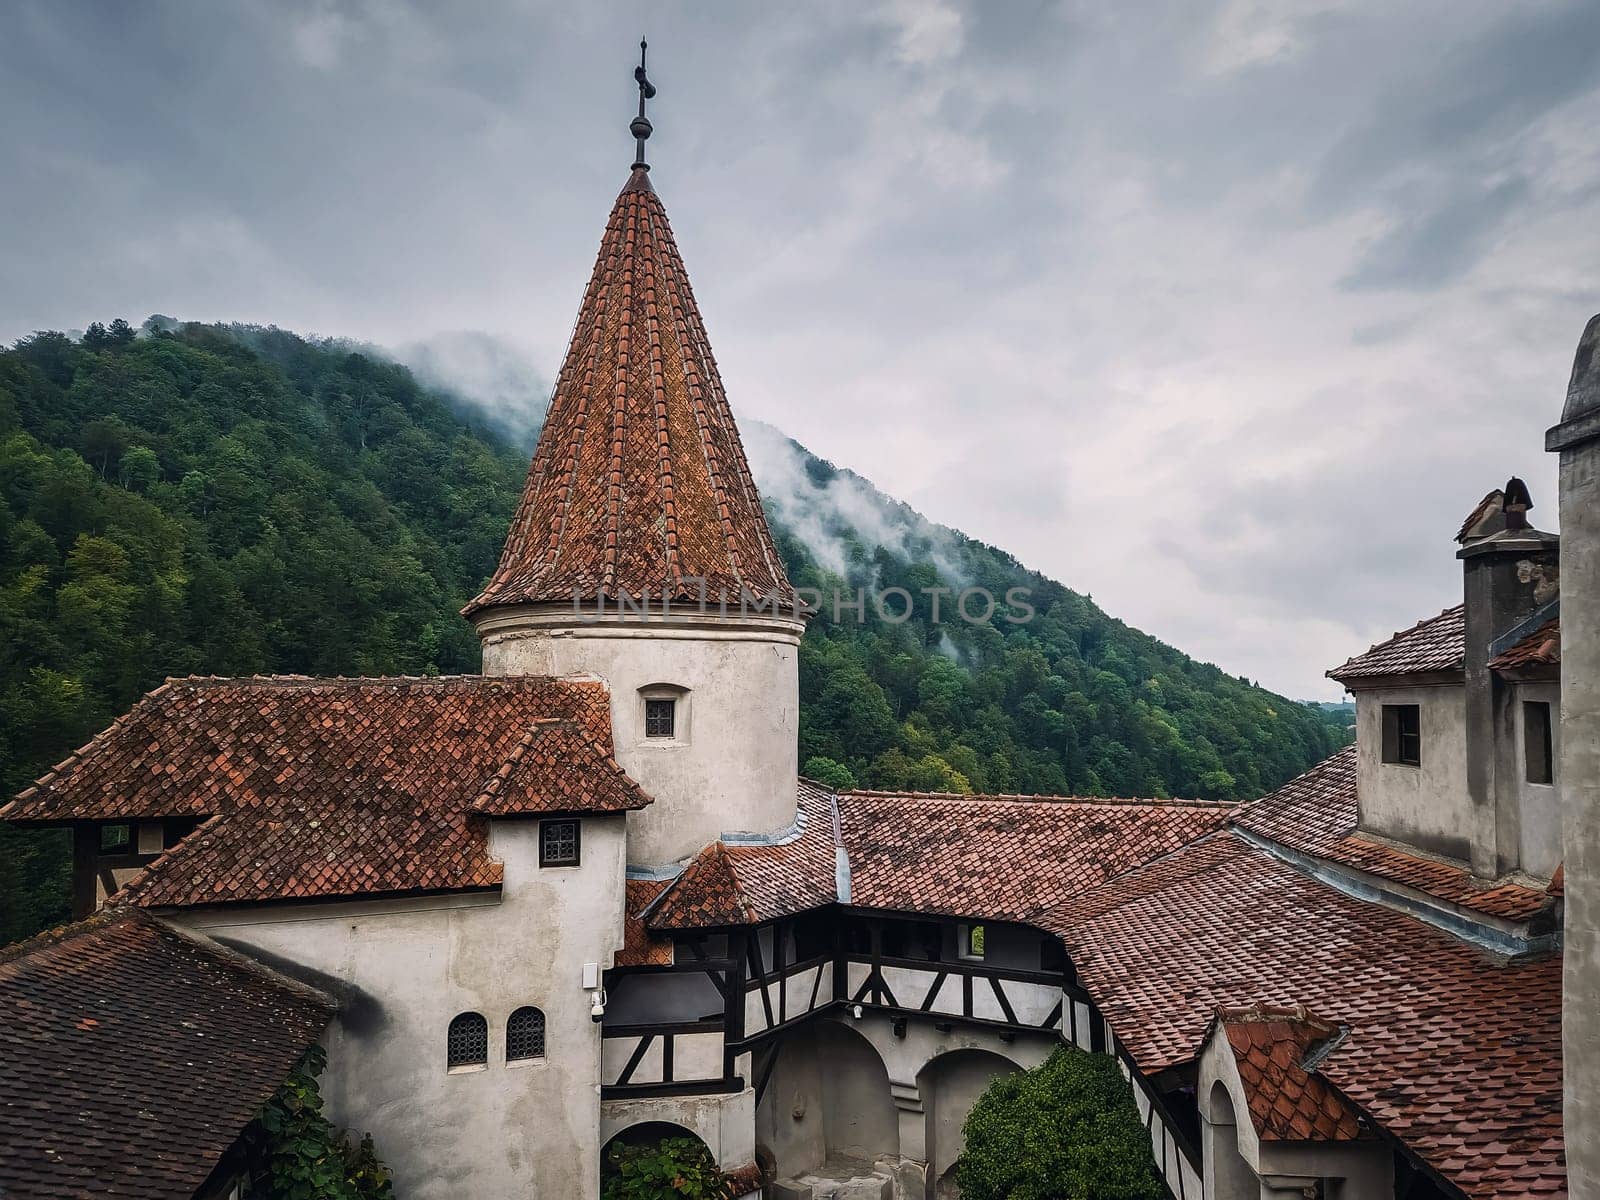 The medieval Bran fortress known as Dracula castle in Transylvania, Romania. Historical saxon style stronghold in the heart of Carpathian mountains by psychoshadow